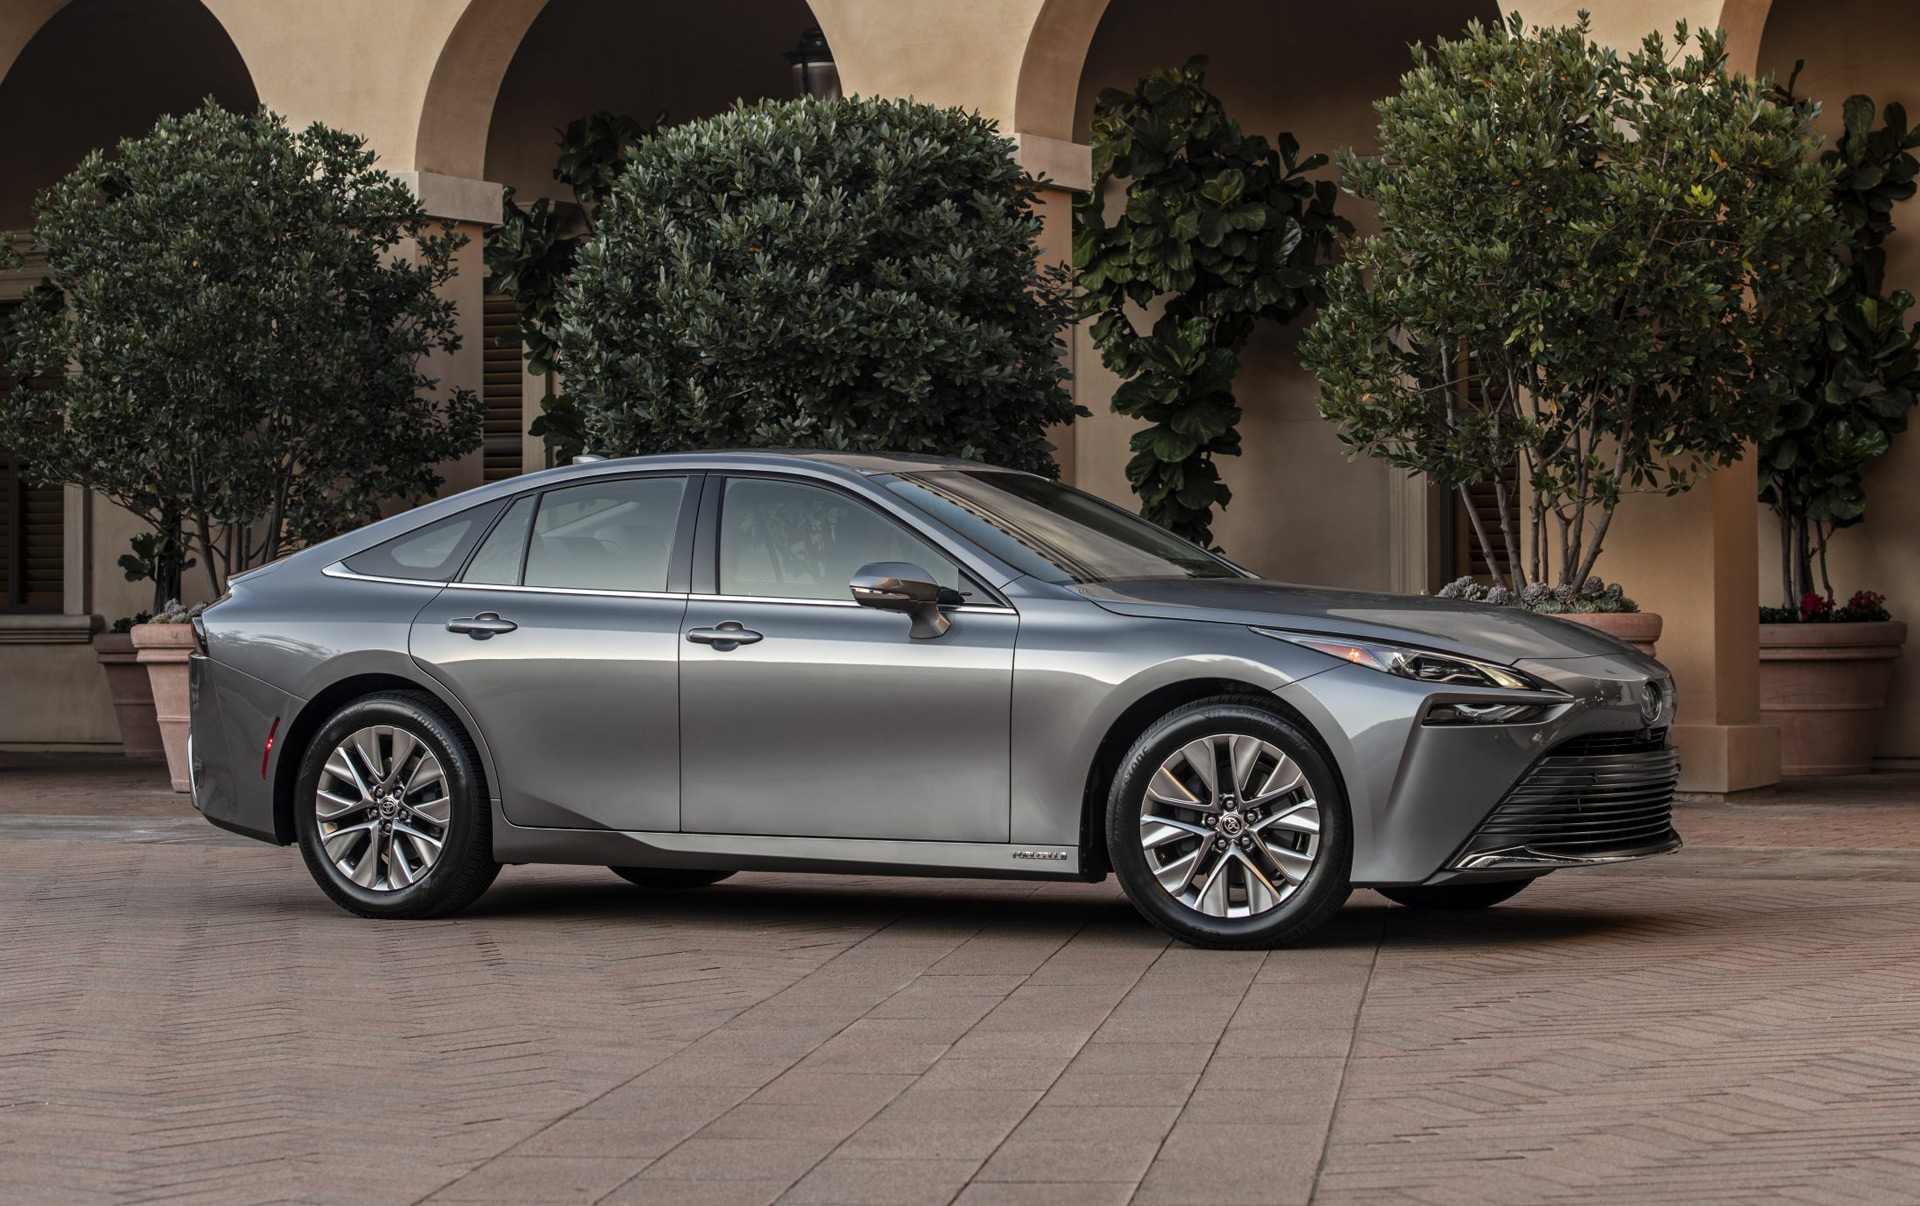 Preview: 2021 Toyota Mirai brings sexier look, lower price for fuel cell  sedan